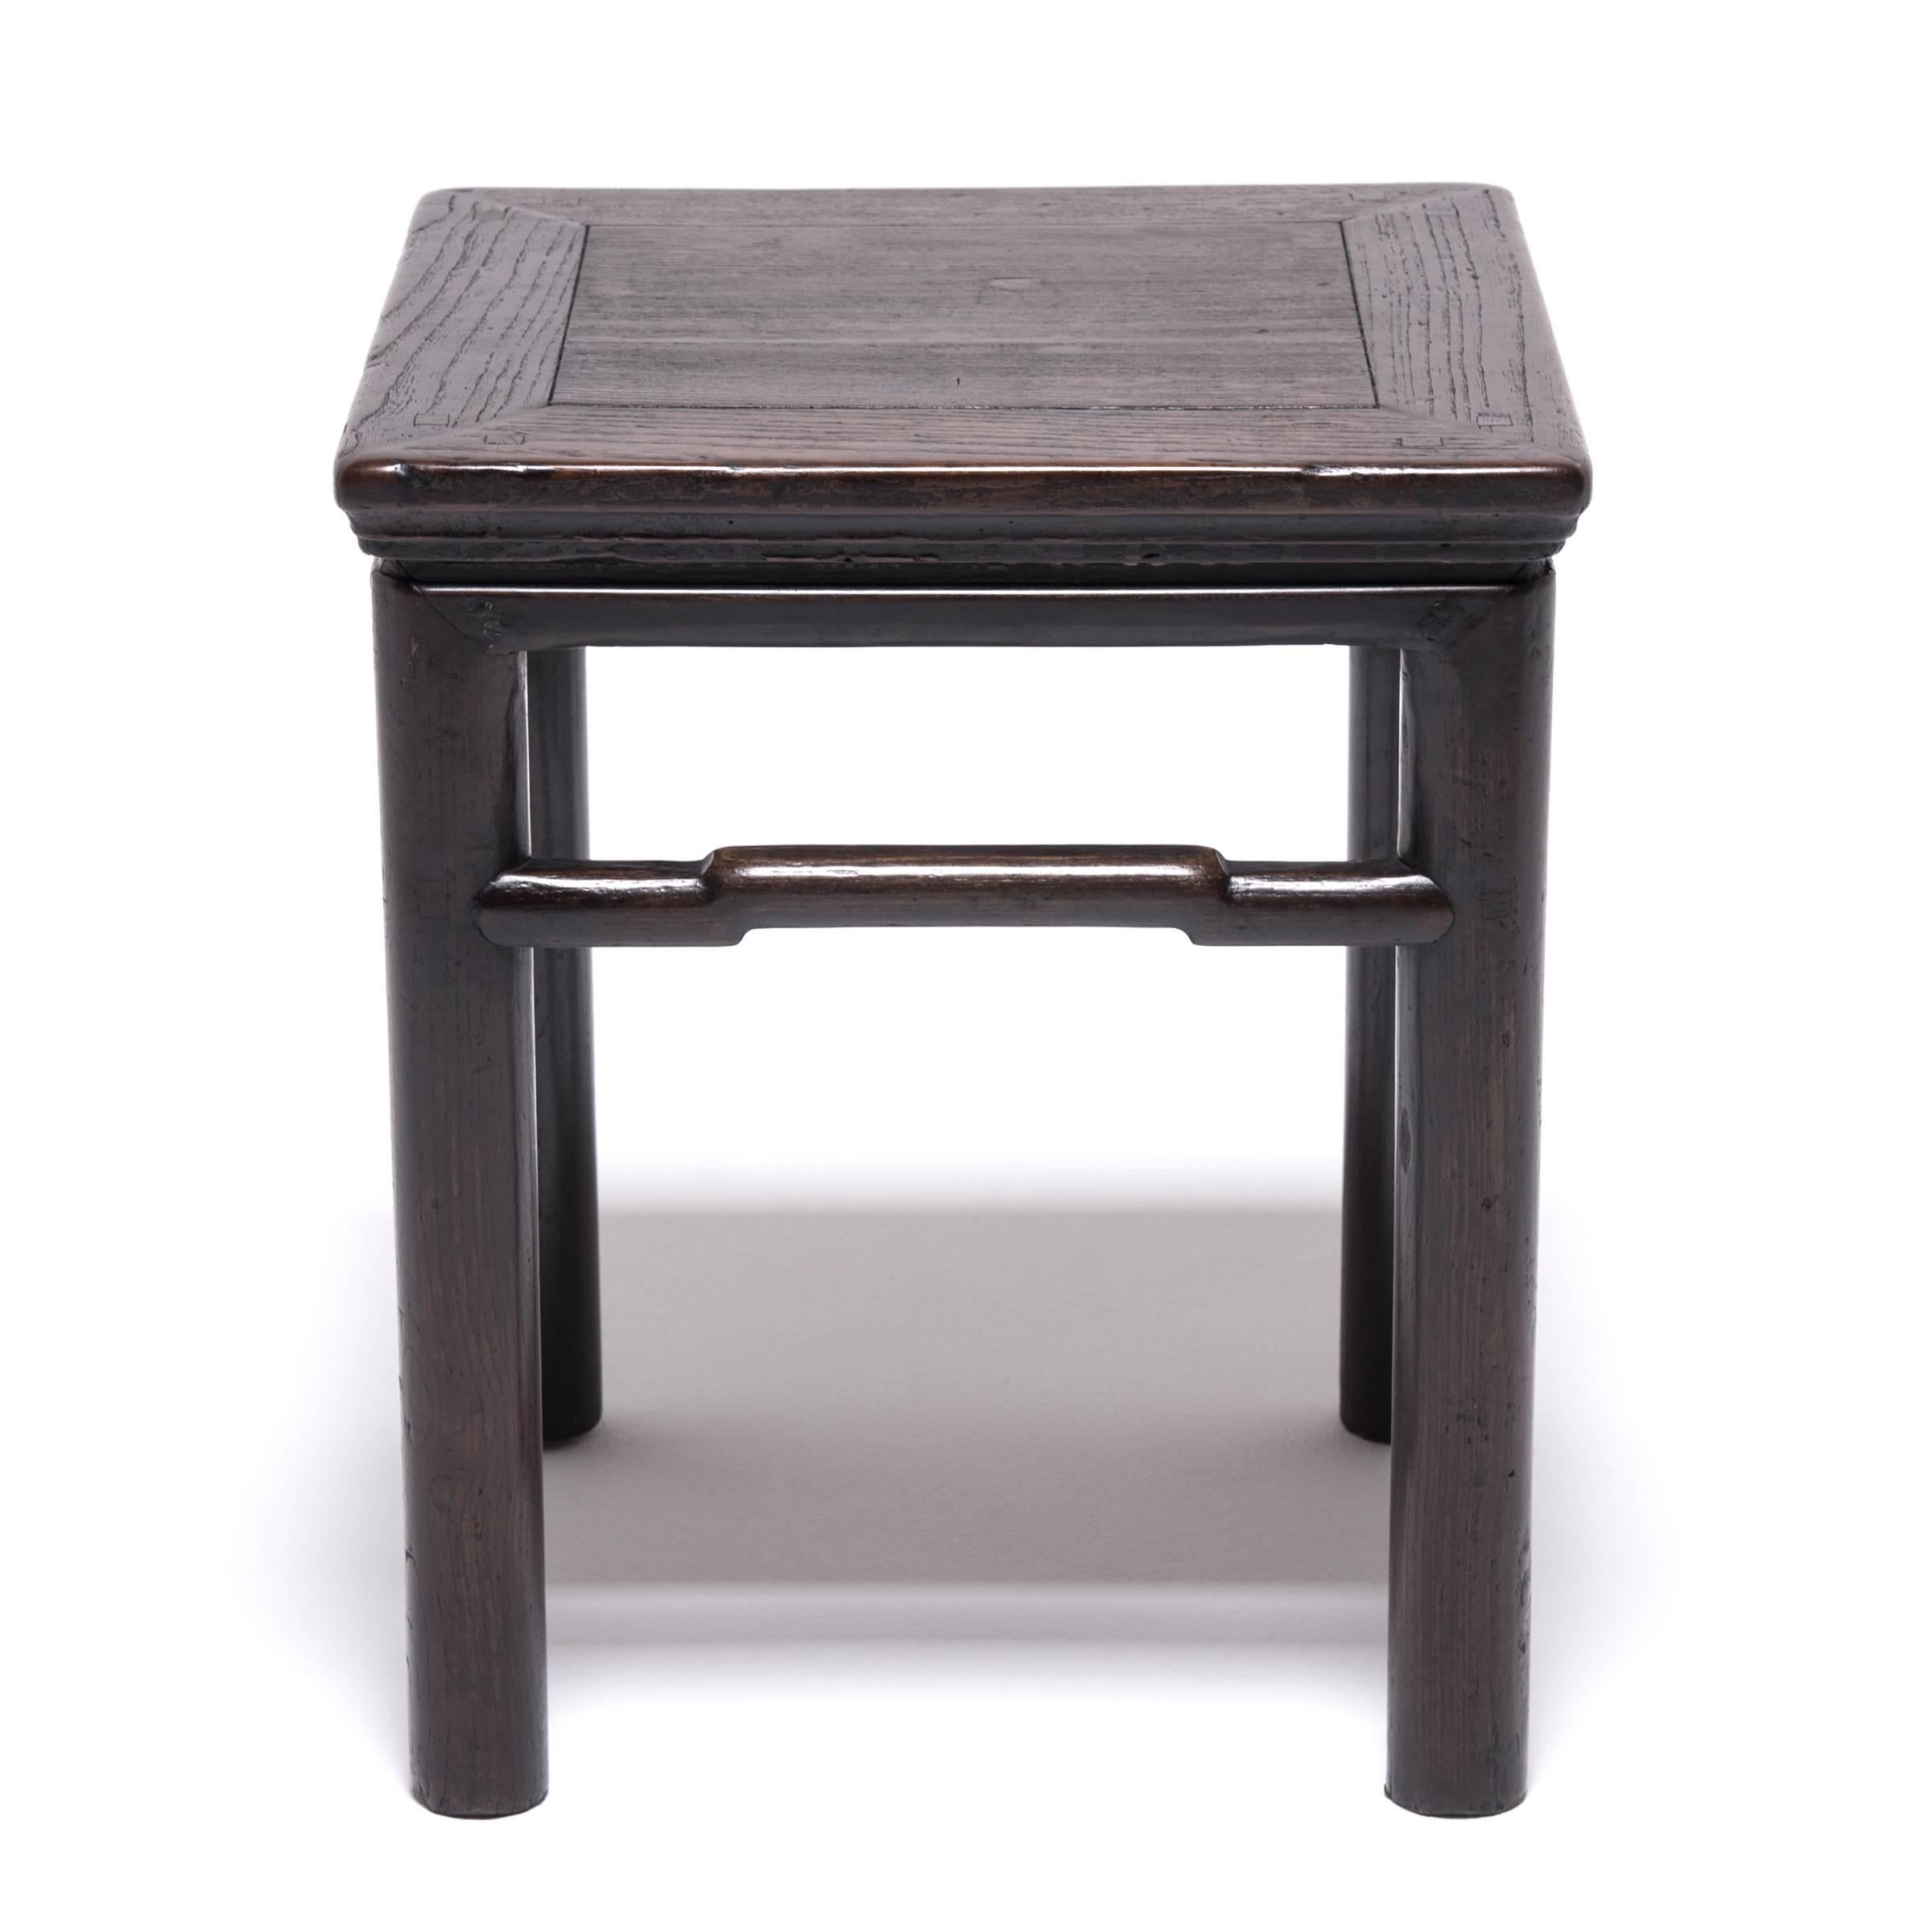 The precursor to the modern “less is more” era, the Ming dynasty epitomized the moment when form and function came together seamlessly. Furniture was deliberately designed to be simple and austere to let its shape and the natural color of wood speak